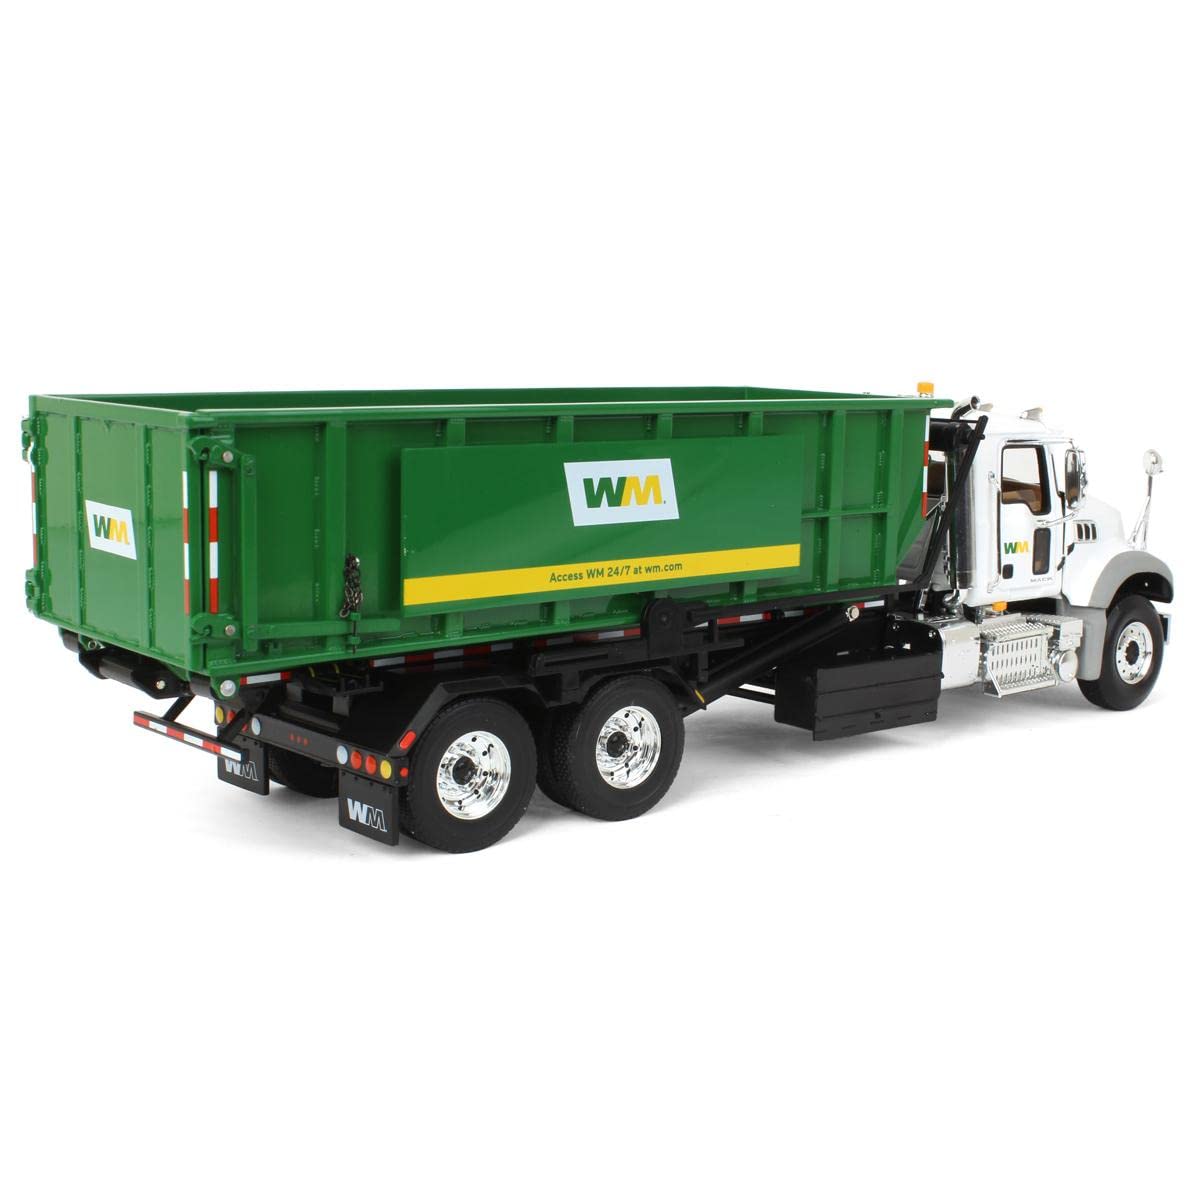 First Gear 1/34 Mack Granite MP Waste Management Truck w/Roll-Off Container 10-4305D